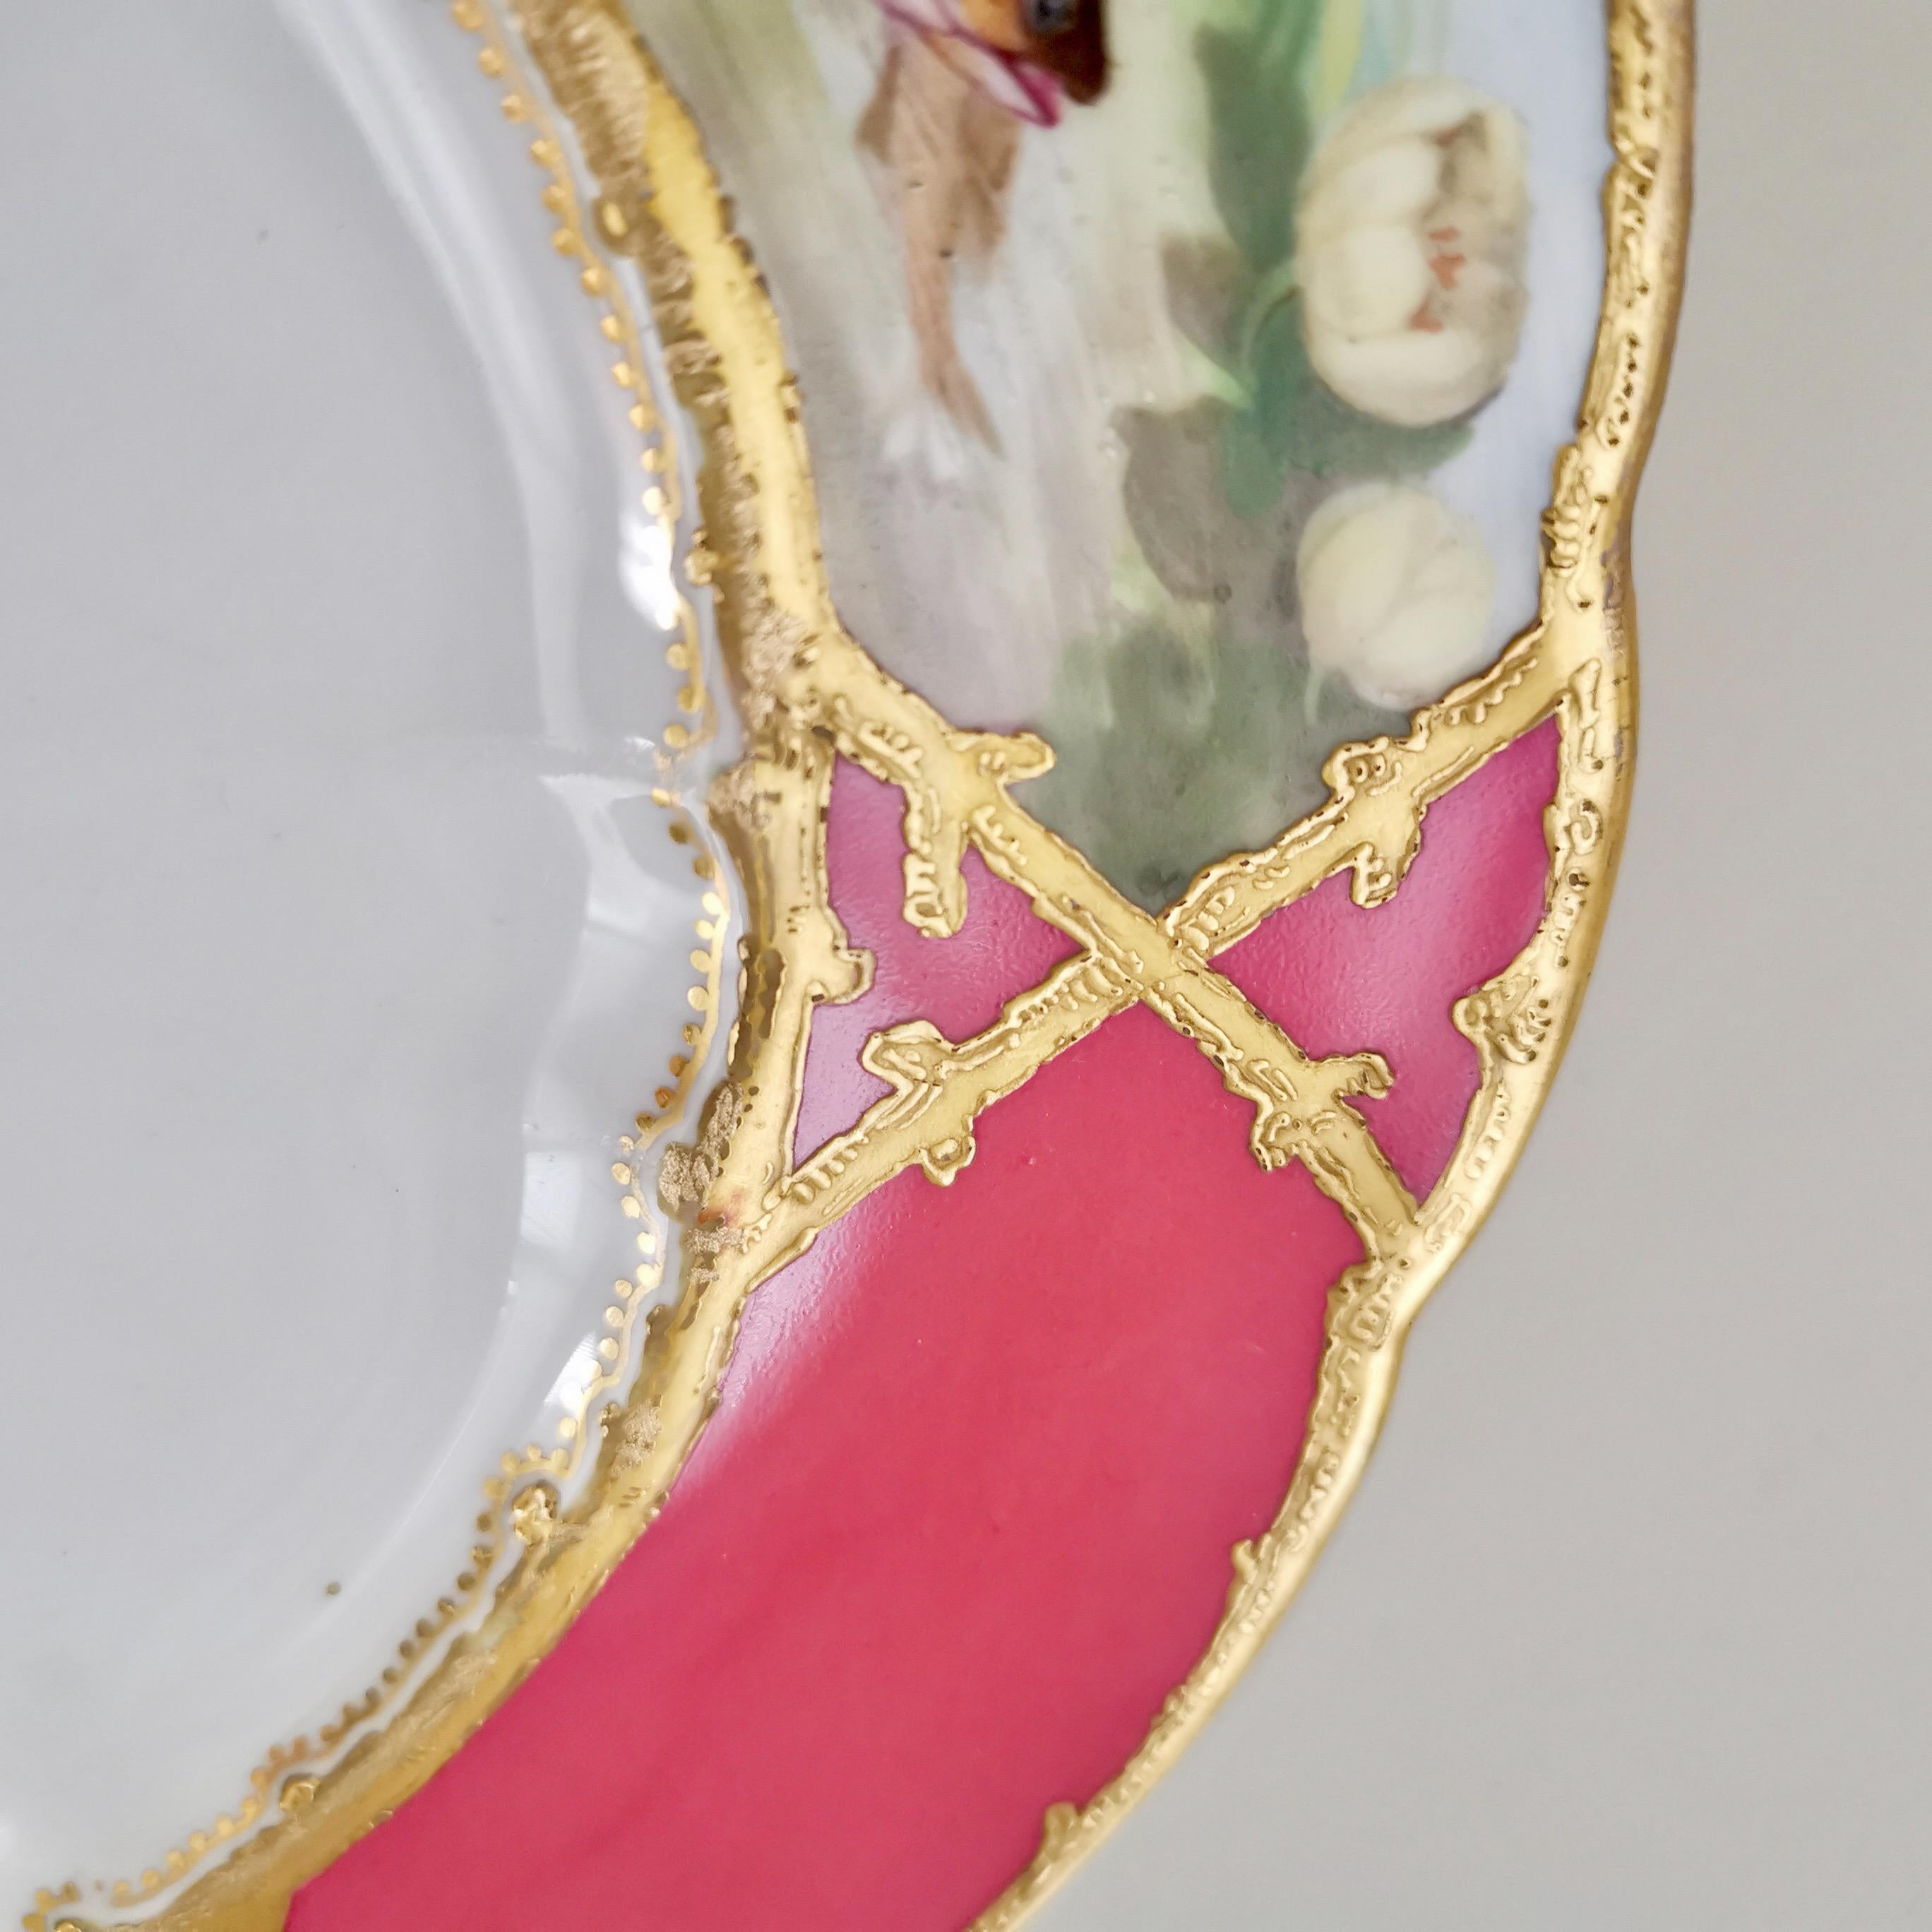 Coalport Porcelain Plate, Hot Pink with Birds and Fish, Raised Gilt, ca 1870 4